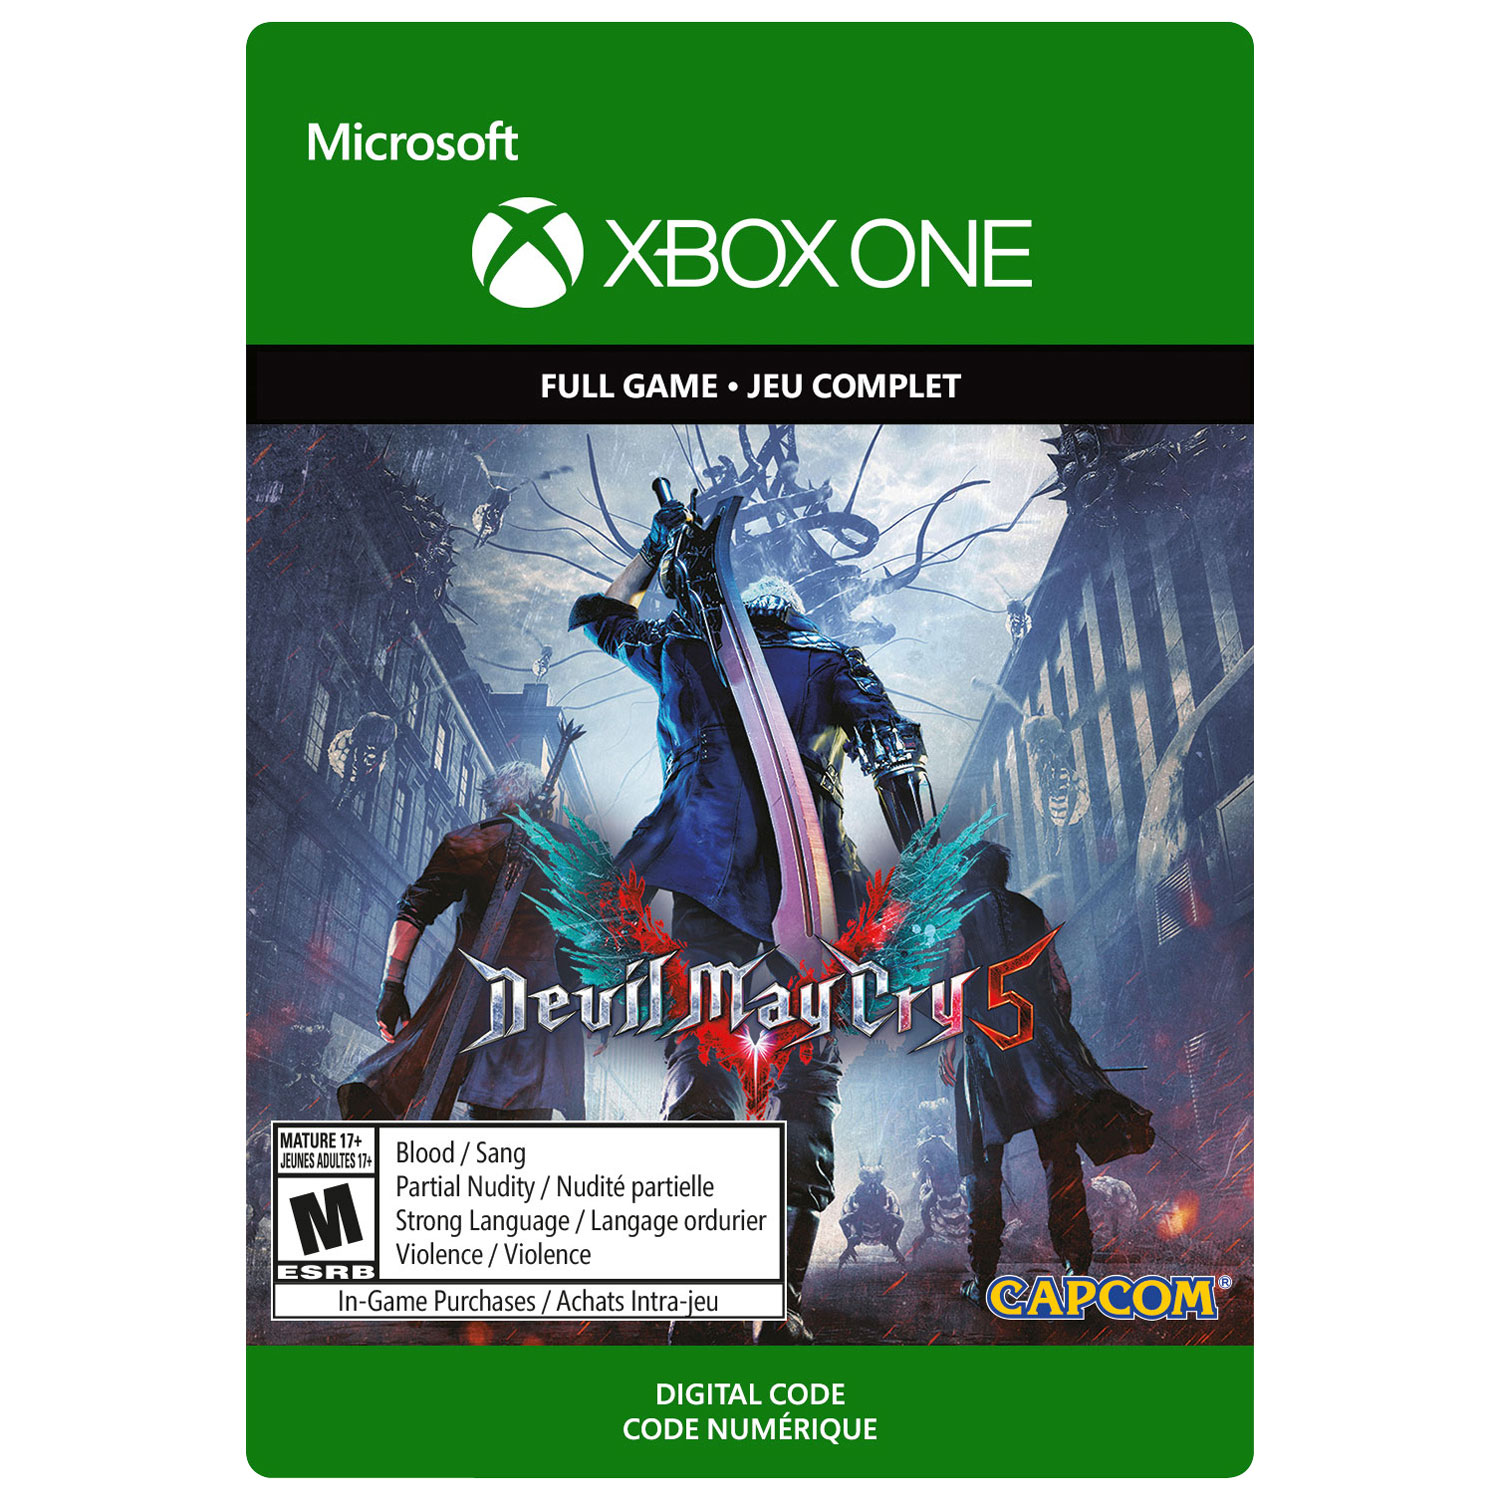 Devil May Cry 5 (Xbox One) - Digital Download